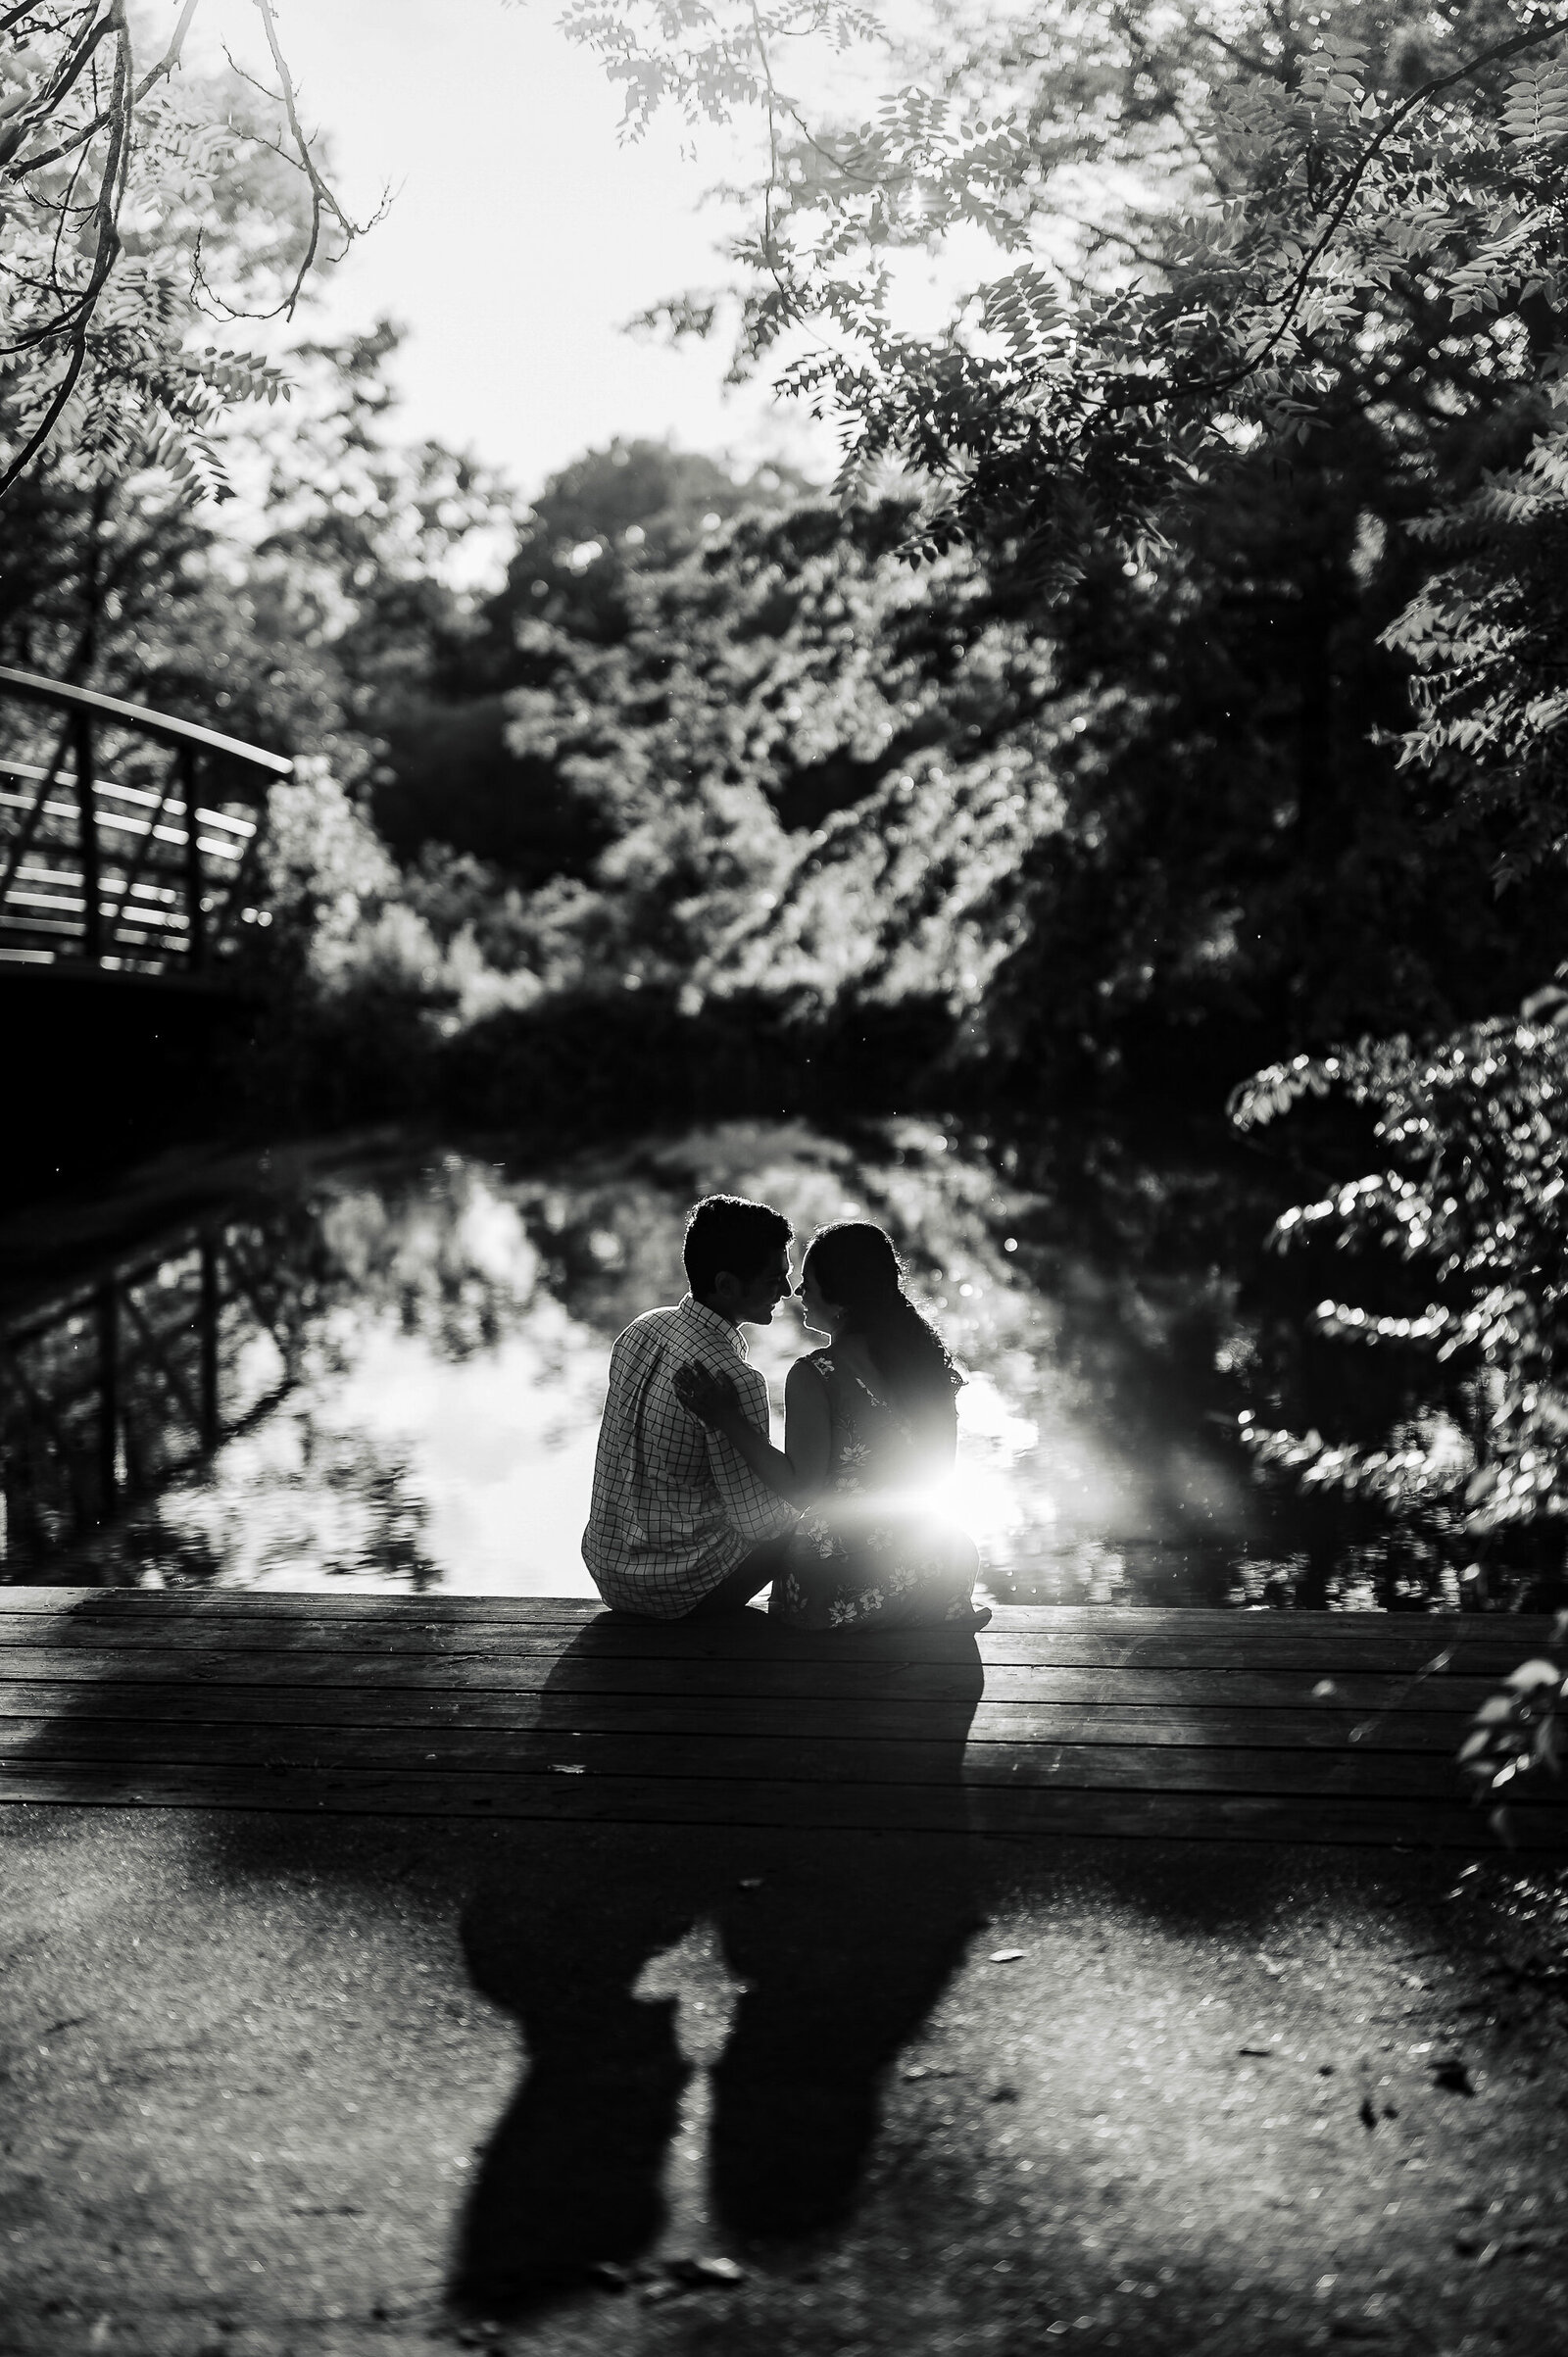 Capture your NJ engagement with Ishan Fotografi’s timeless style.